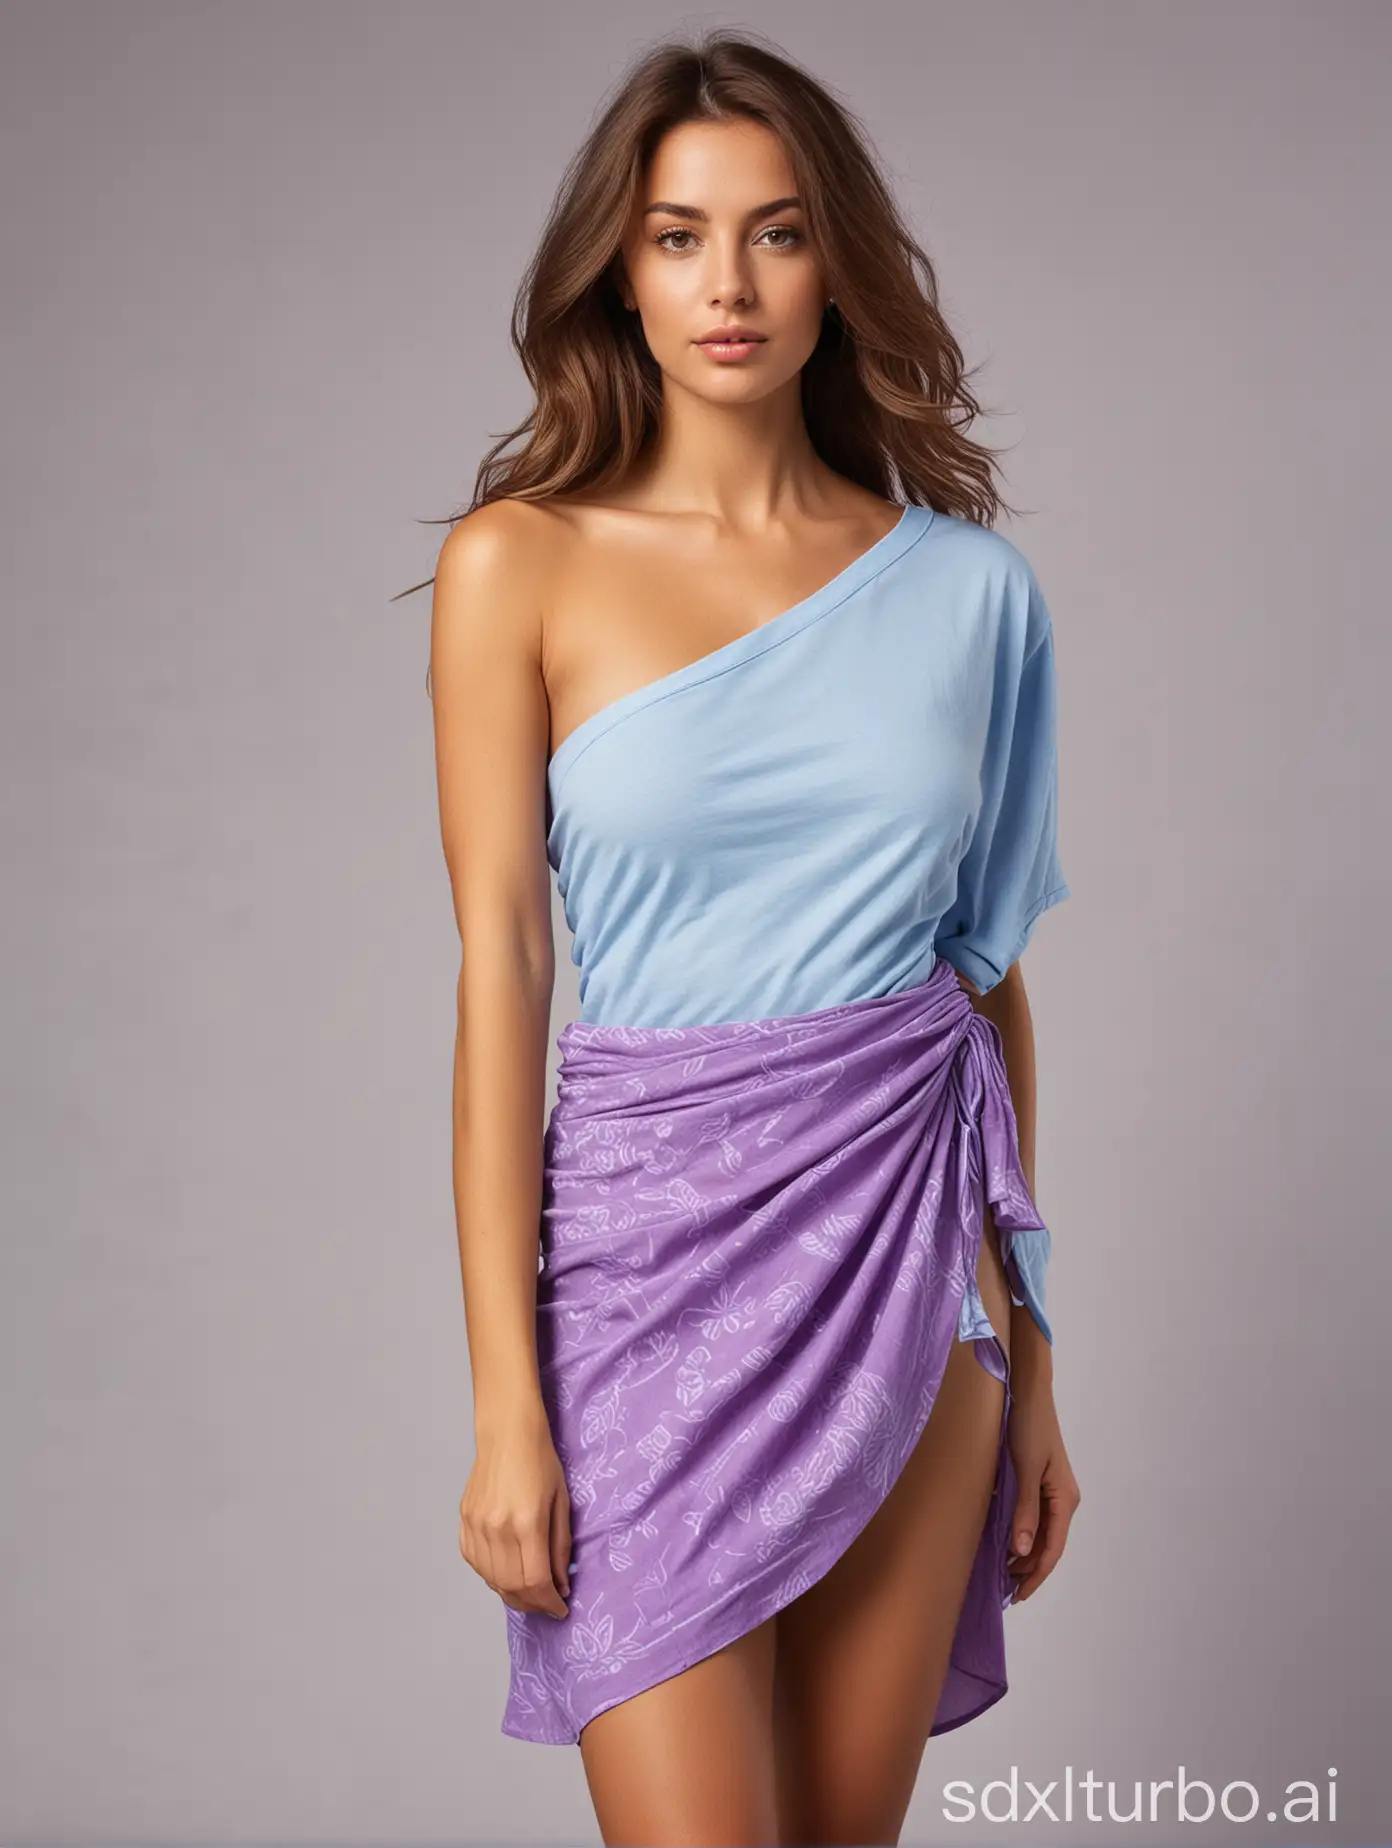 woman, medium brown haired, slim body, small breast, wearing light blue oversized t-shirt, wearing purple sarong